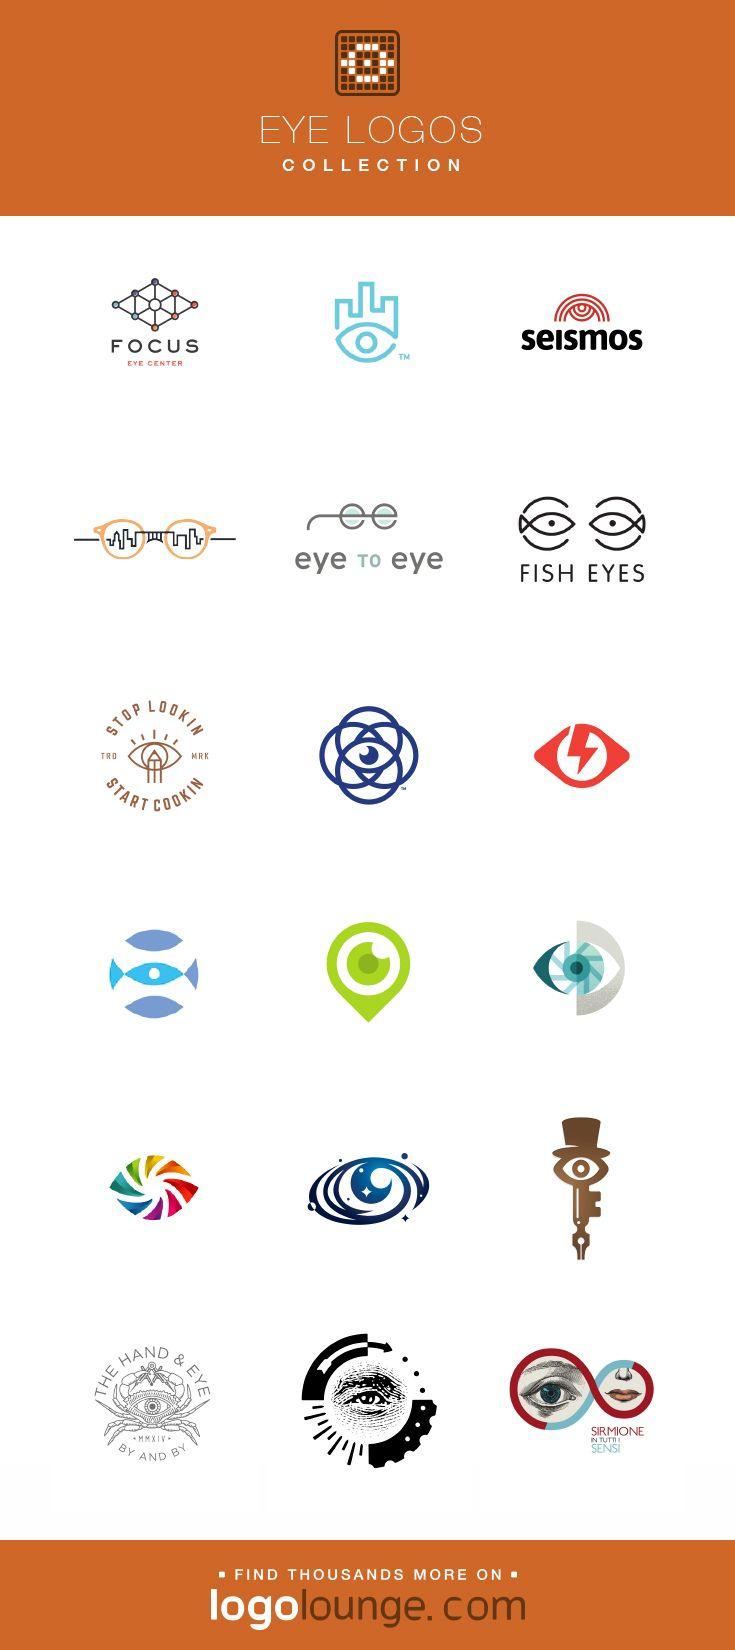 Look with Eyes Logo - Logo Collection : Eye vector logo designs. Pupil, sight, see